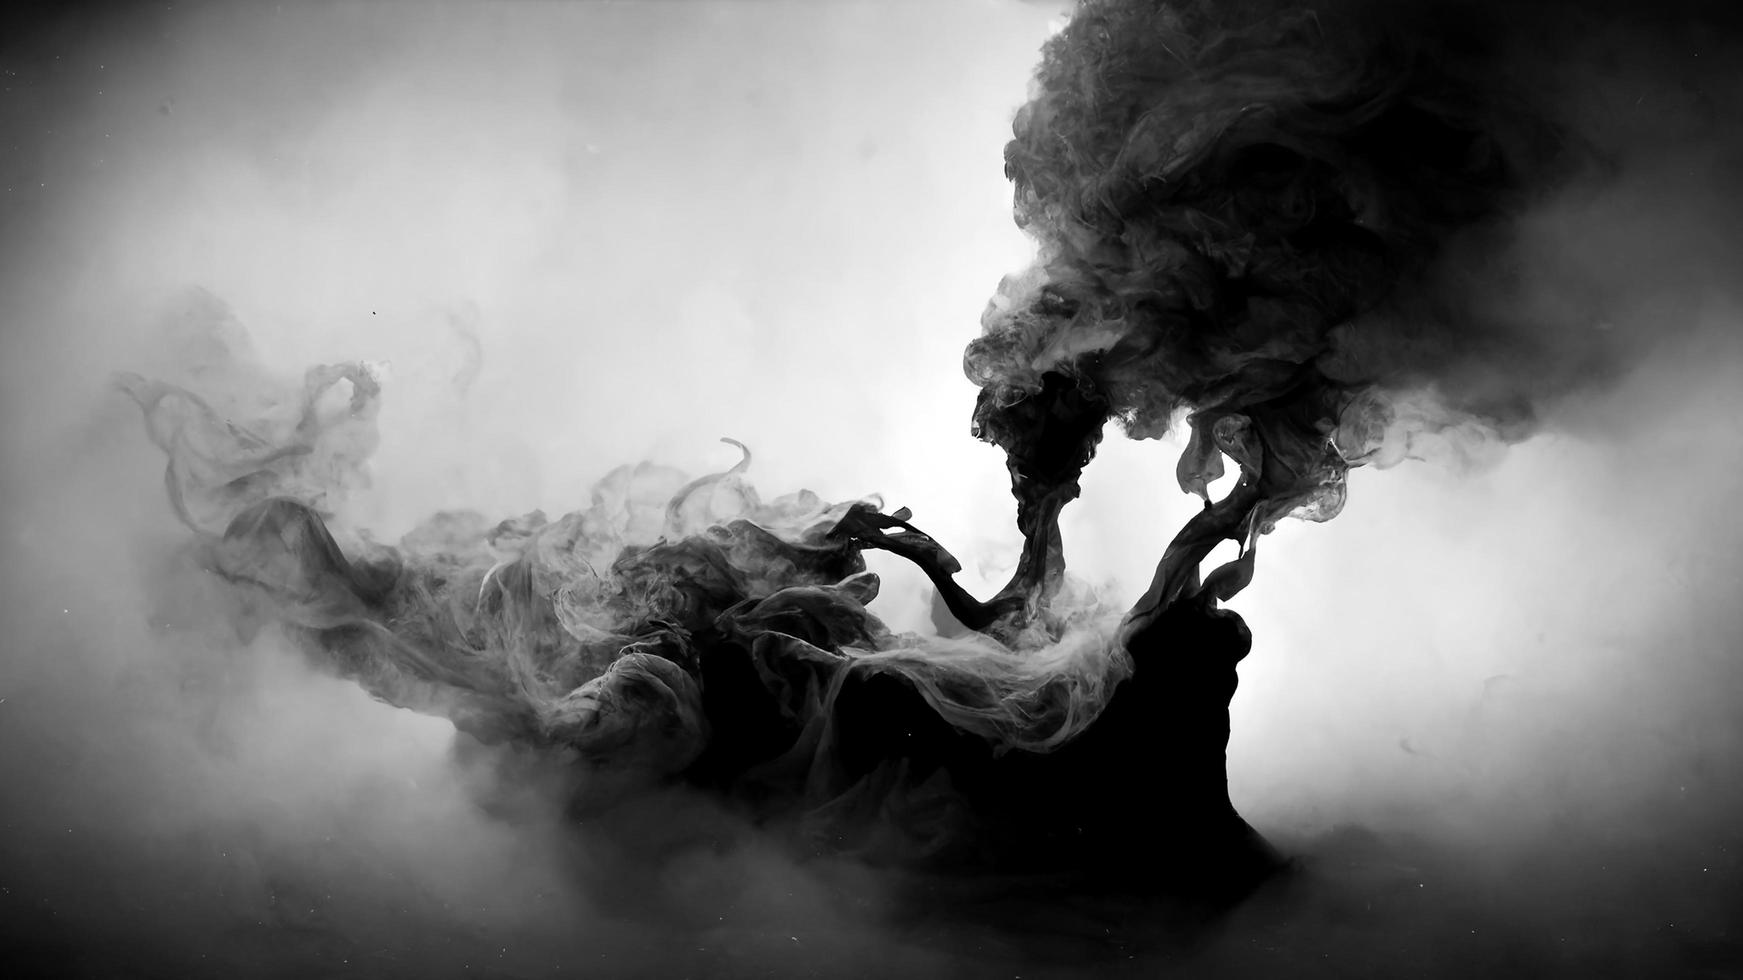 Abstract smoke in black and white background, digital art, halloween concept photo